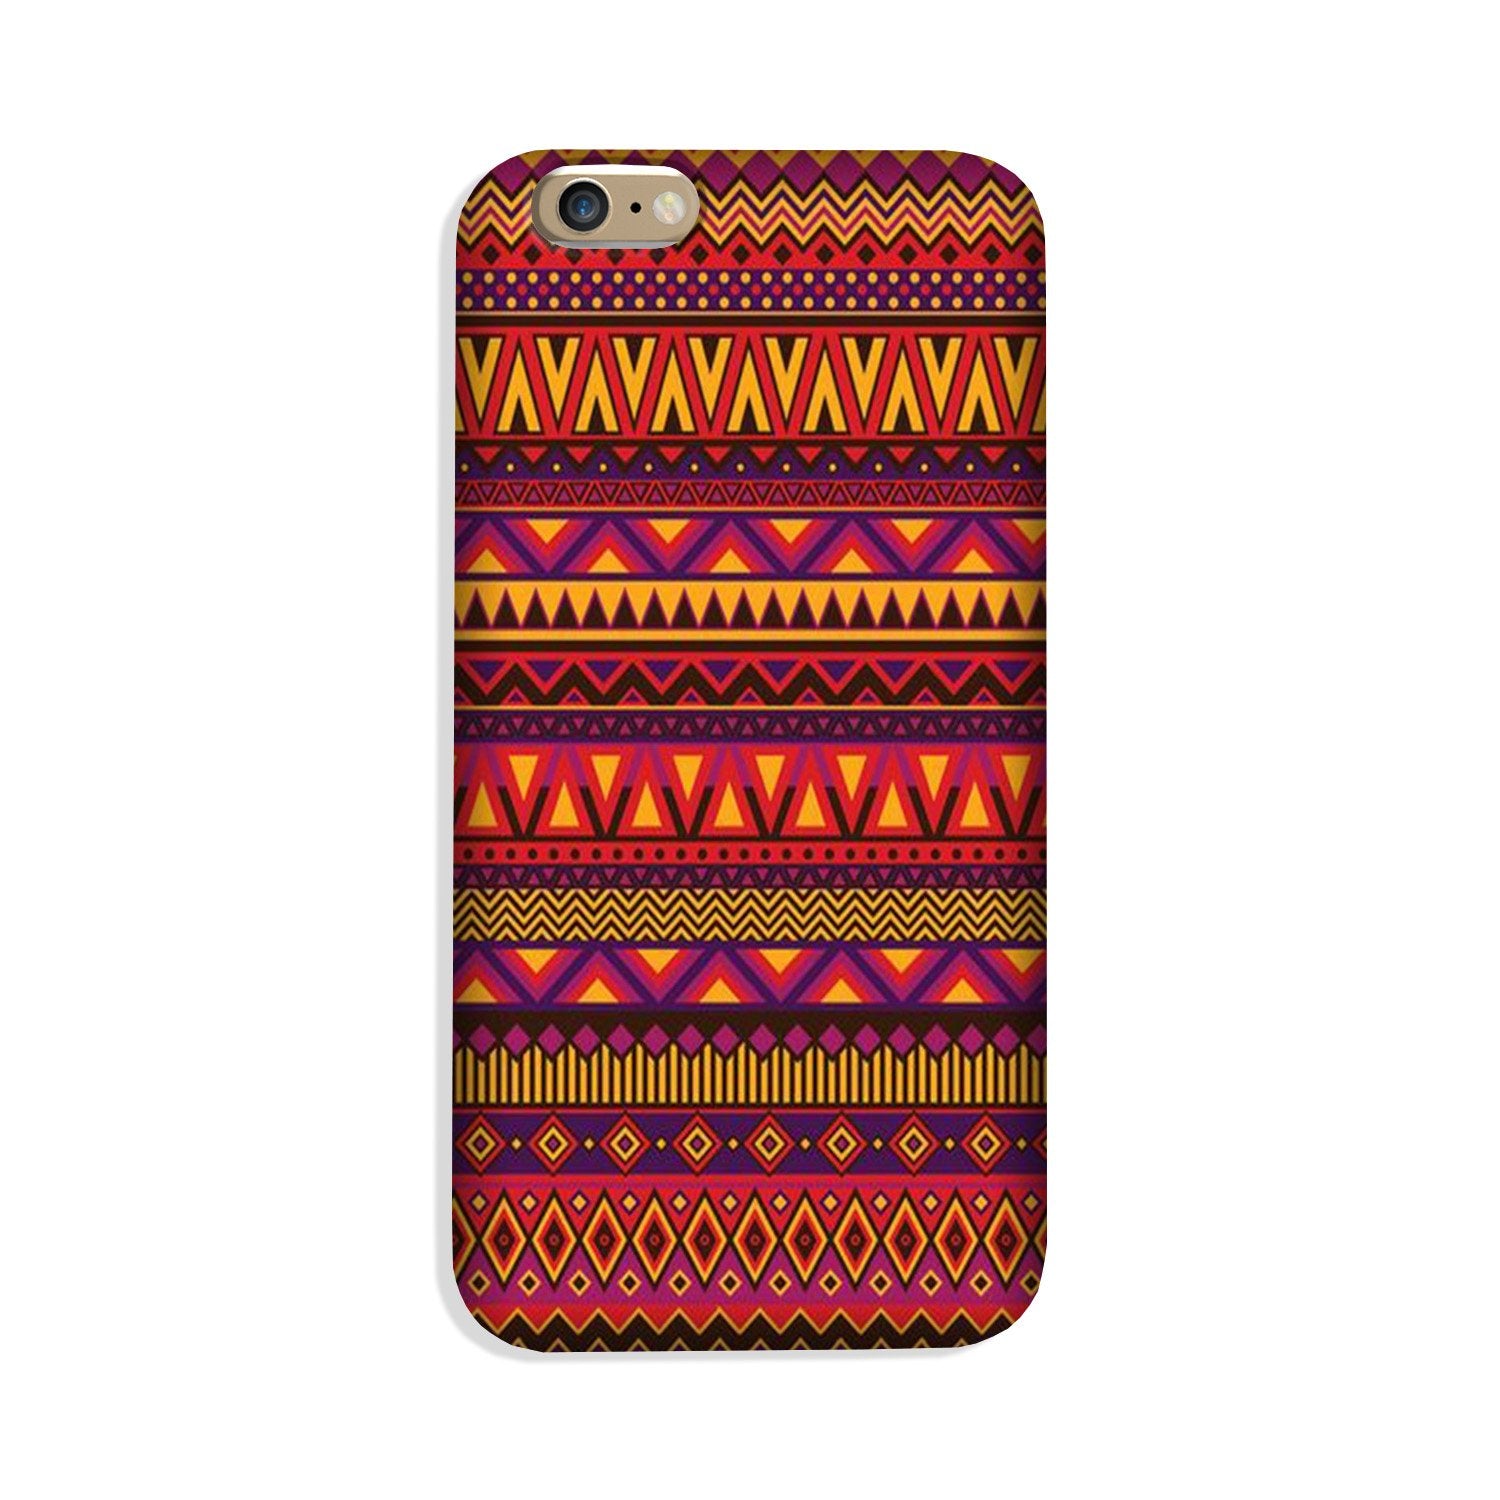 Zigzag line pattern2 Case for iPhone 8